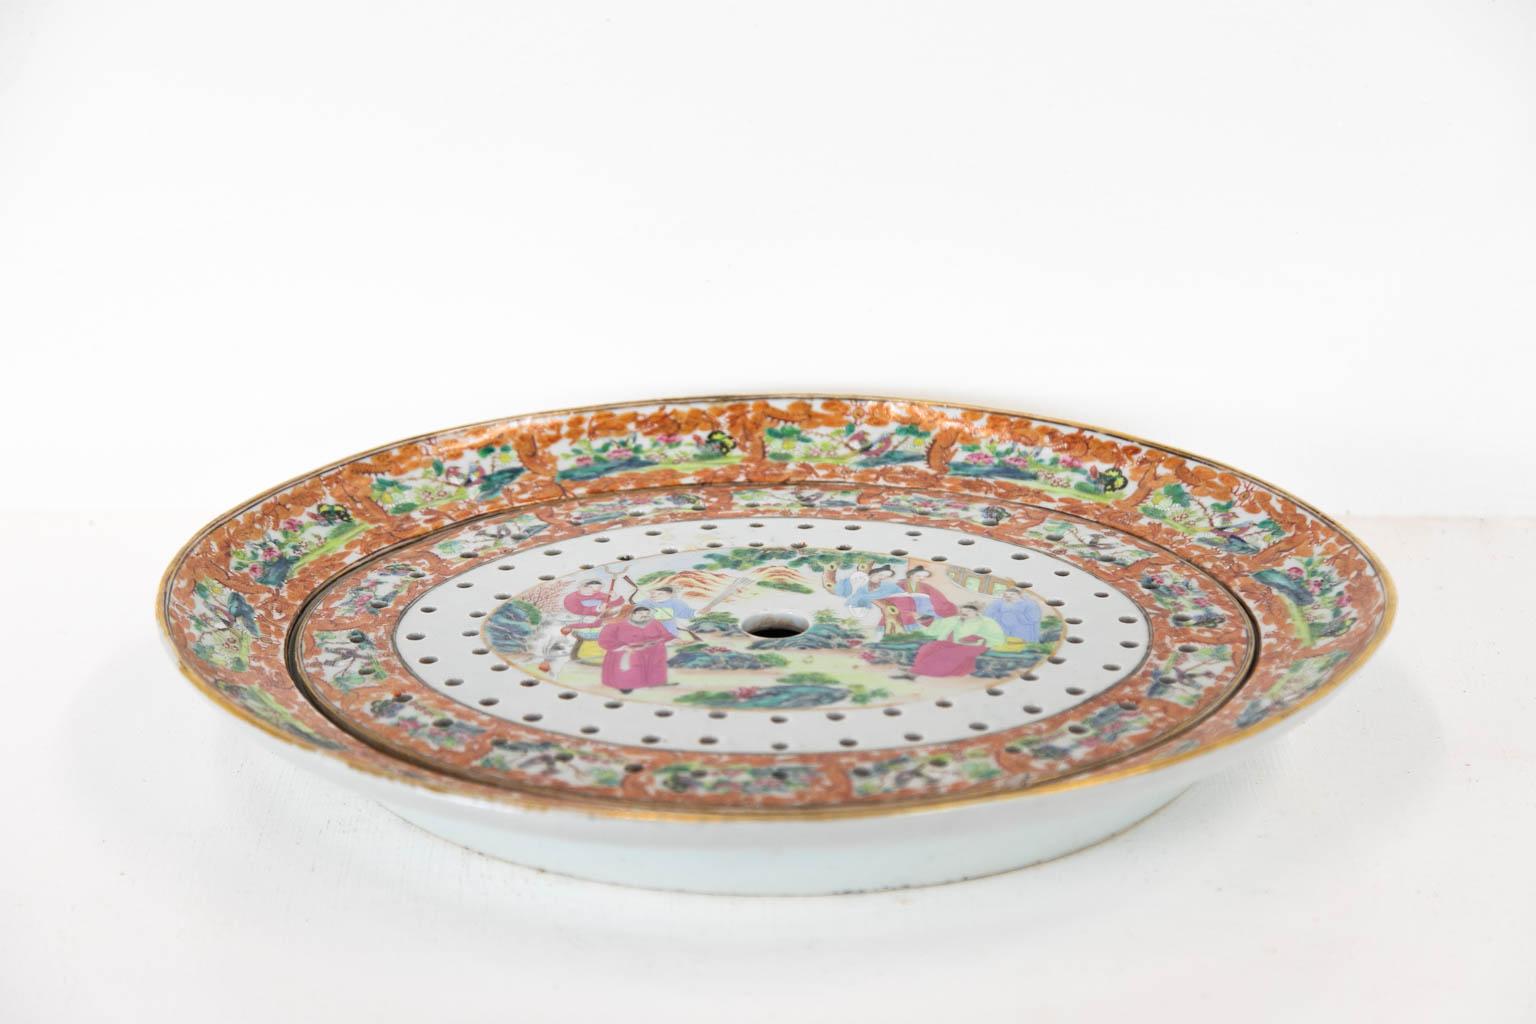 The center panel in both the platter and strainer have richly painted Mandarin court scenes which are framed with depiction of birds, butterflies, and flowers framed with stylized dragons. The strainer has a 1/2 by 1/4 inch chip on the bottom edge.